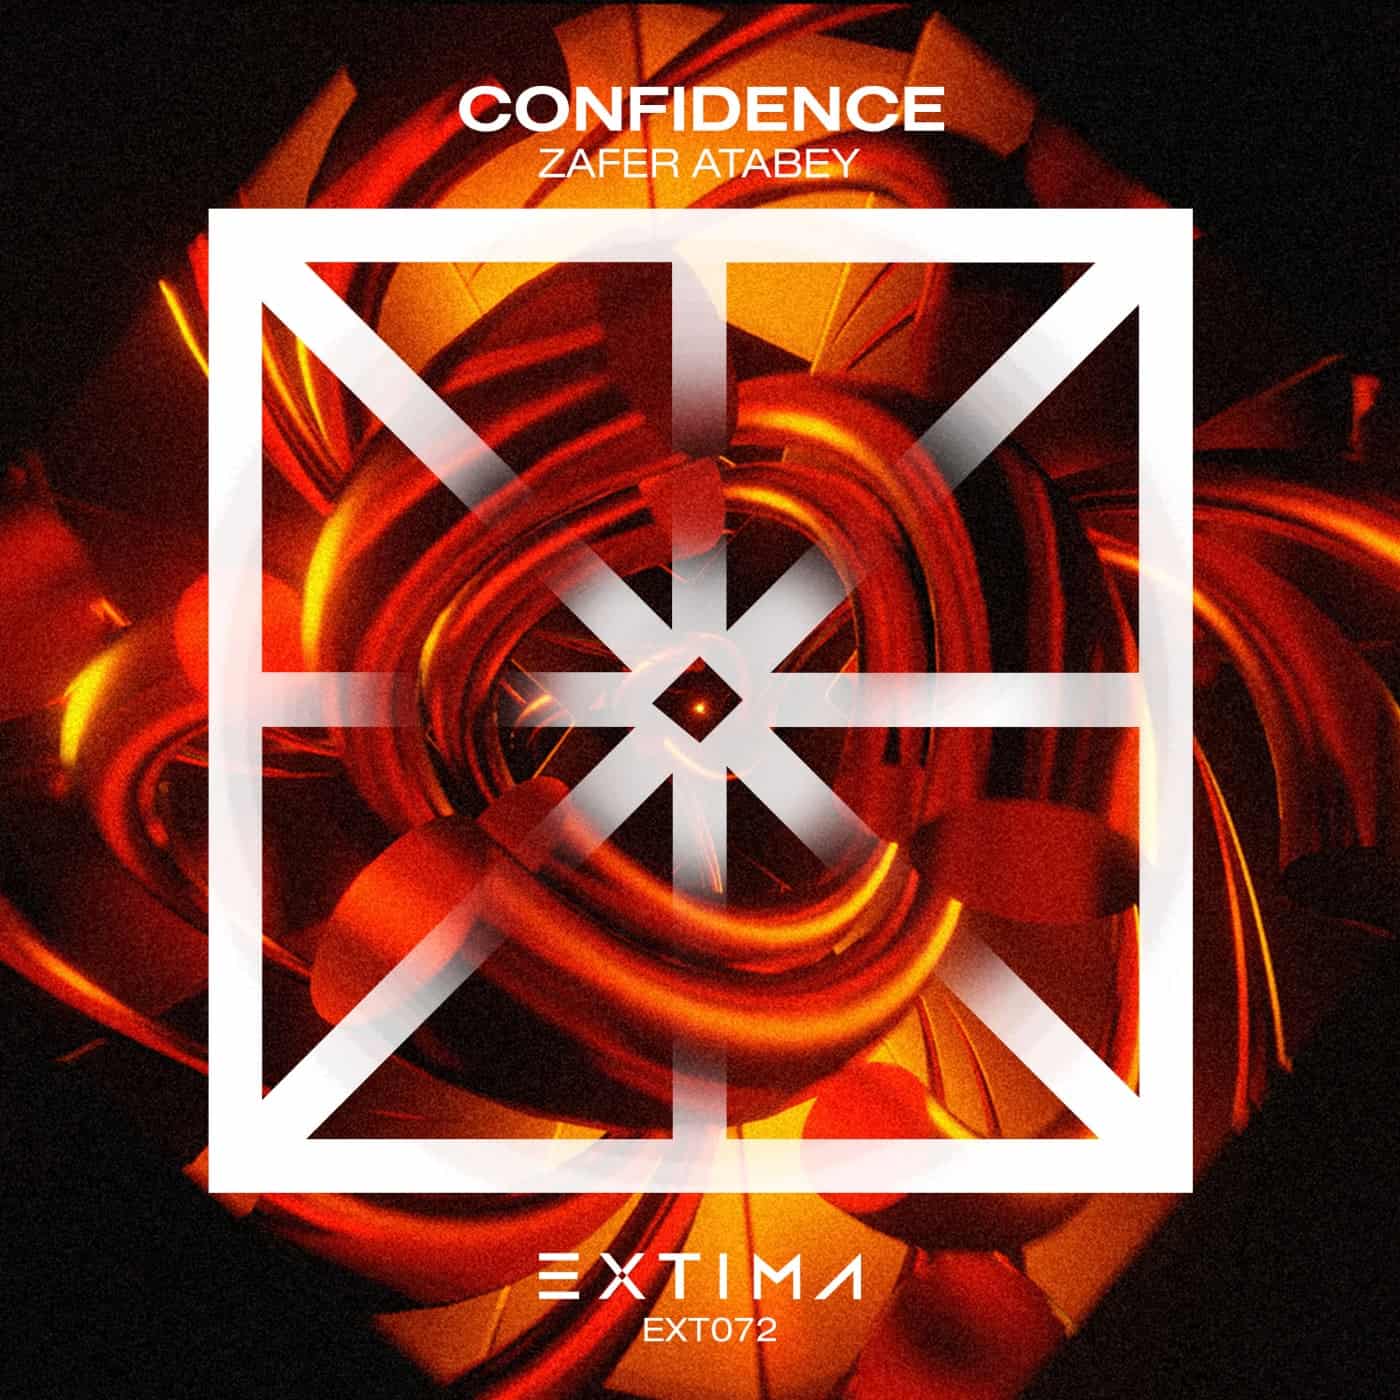 image cover: Confidence by Zafer Atabey on EXTIMA